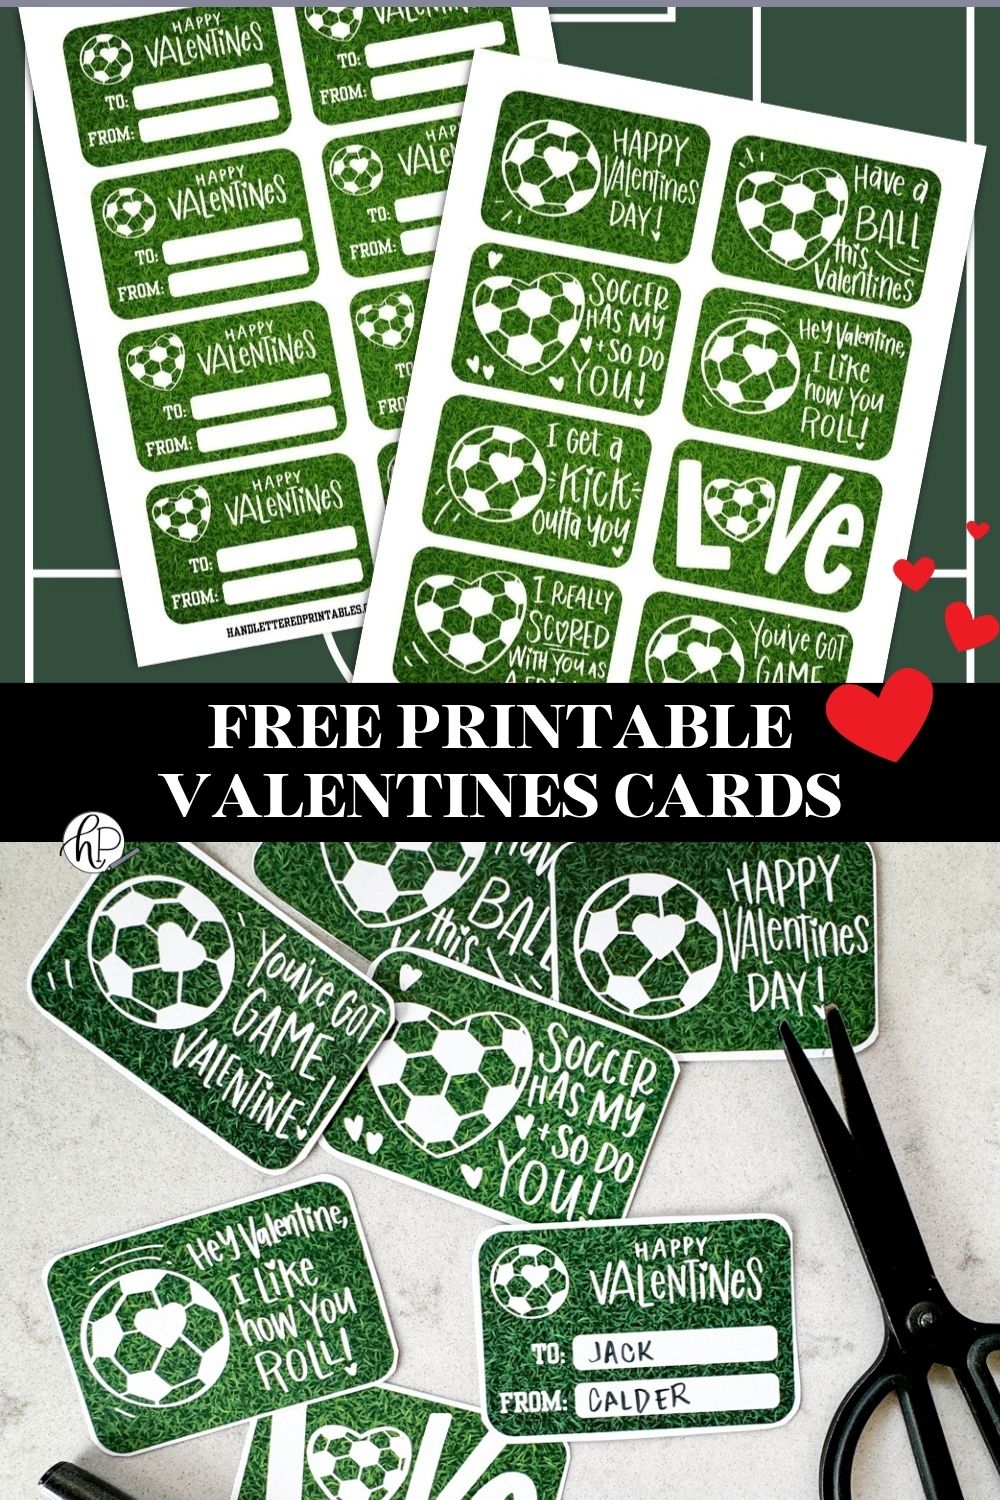 top image: 8 soccer themed valentines cards shown printed out front and back on green background. text title reads: free printable valentines cards bottom image shows valentines cut to size on marble countertop valentines have a heart shaped soccer ball and a soccer ball with a heart on it and a grass background. valentines puns and sentiments include: happy valentines day, have a ball this valentines, hey valentine i like how you roll, soccer has my heart and so do you, i get a kick outta you, love (with a heart soccerball as the o), you've got game valentine, and i really scored with you as a friend reverse reads 'happy valentines' with room for to and from names. soccer/ american football